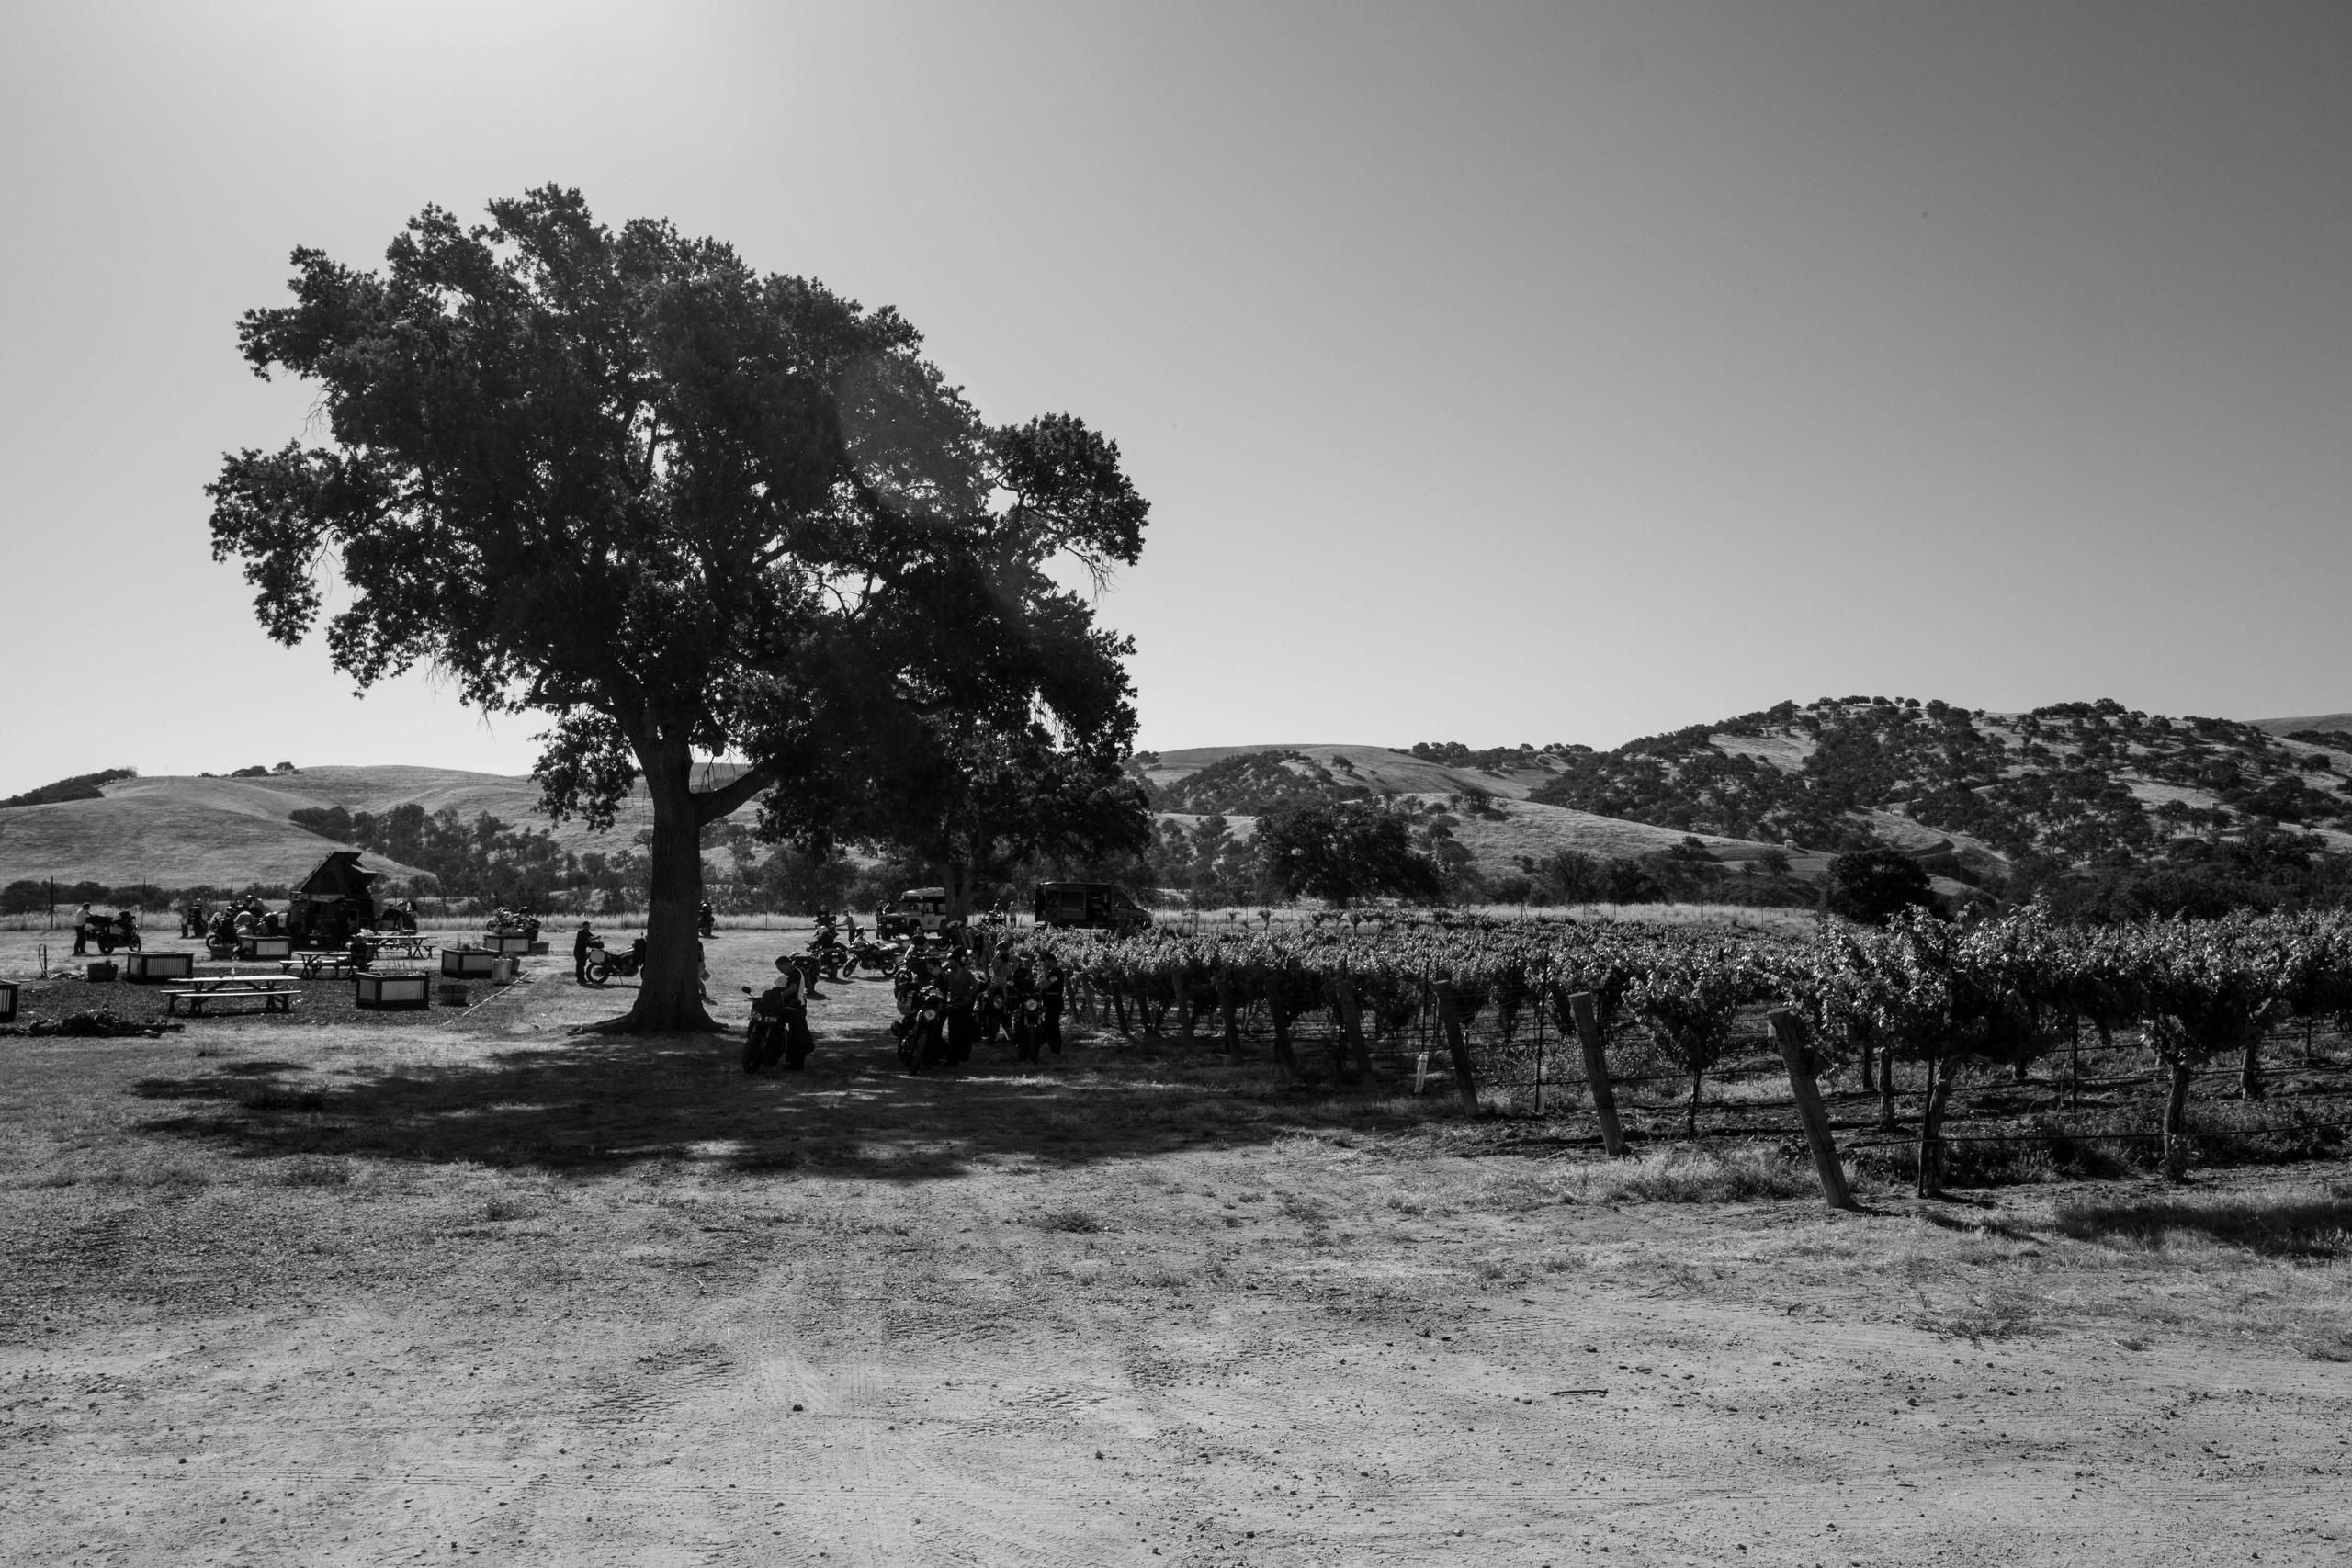 Black and white photo of motorcycles parked under oak tree in Paso Robles winery